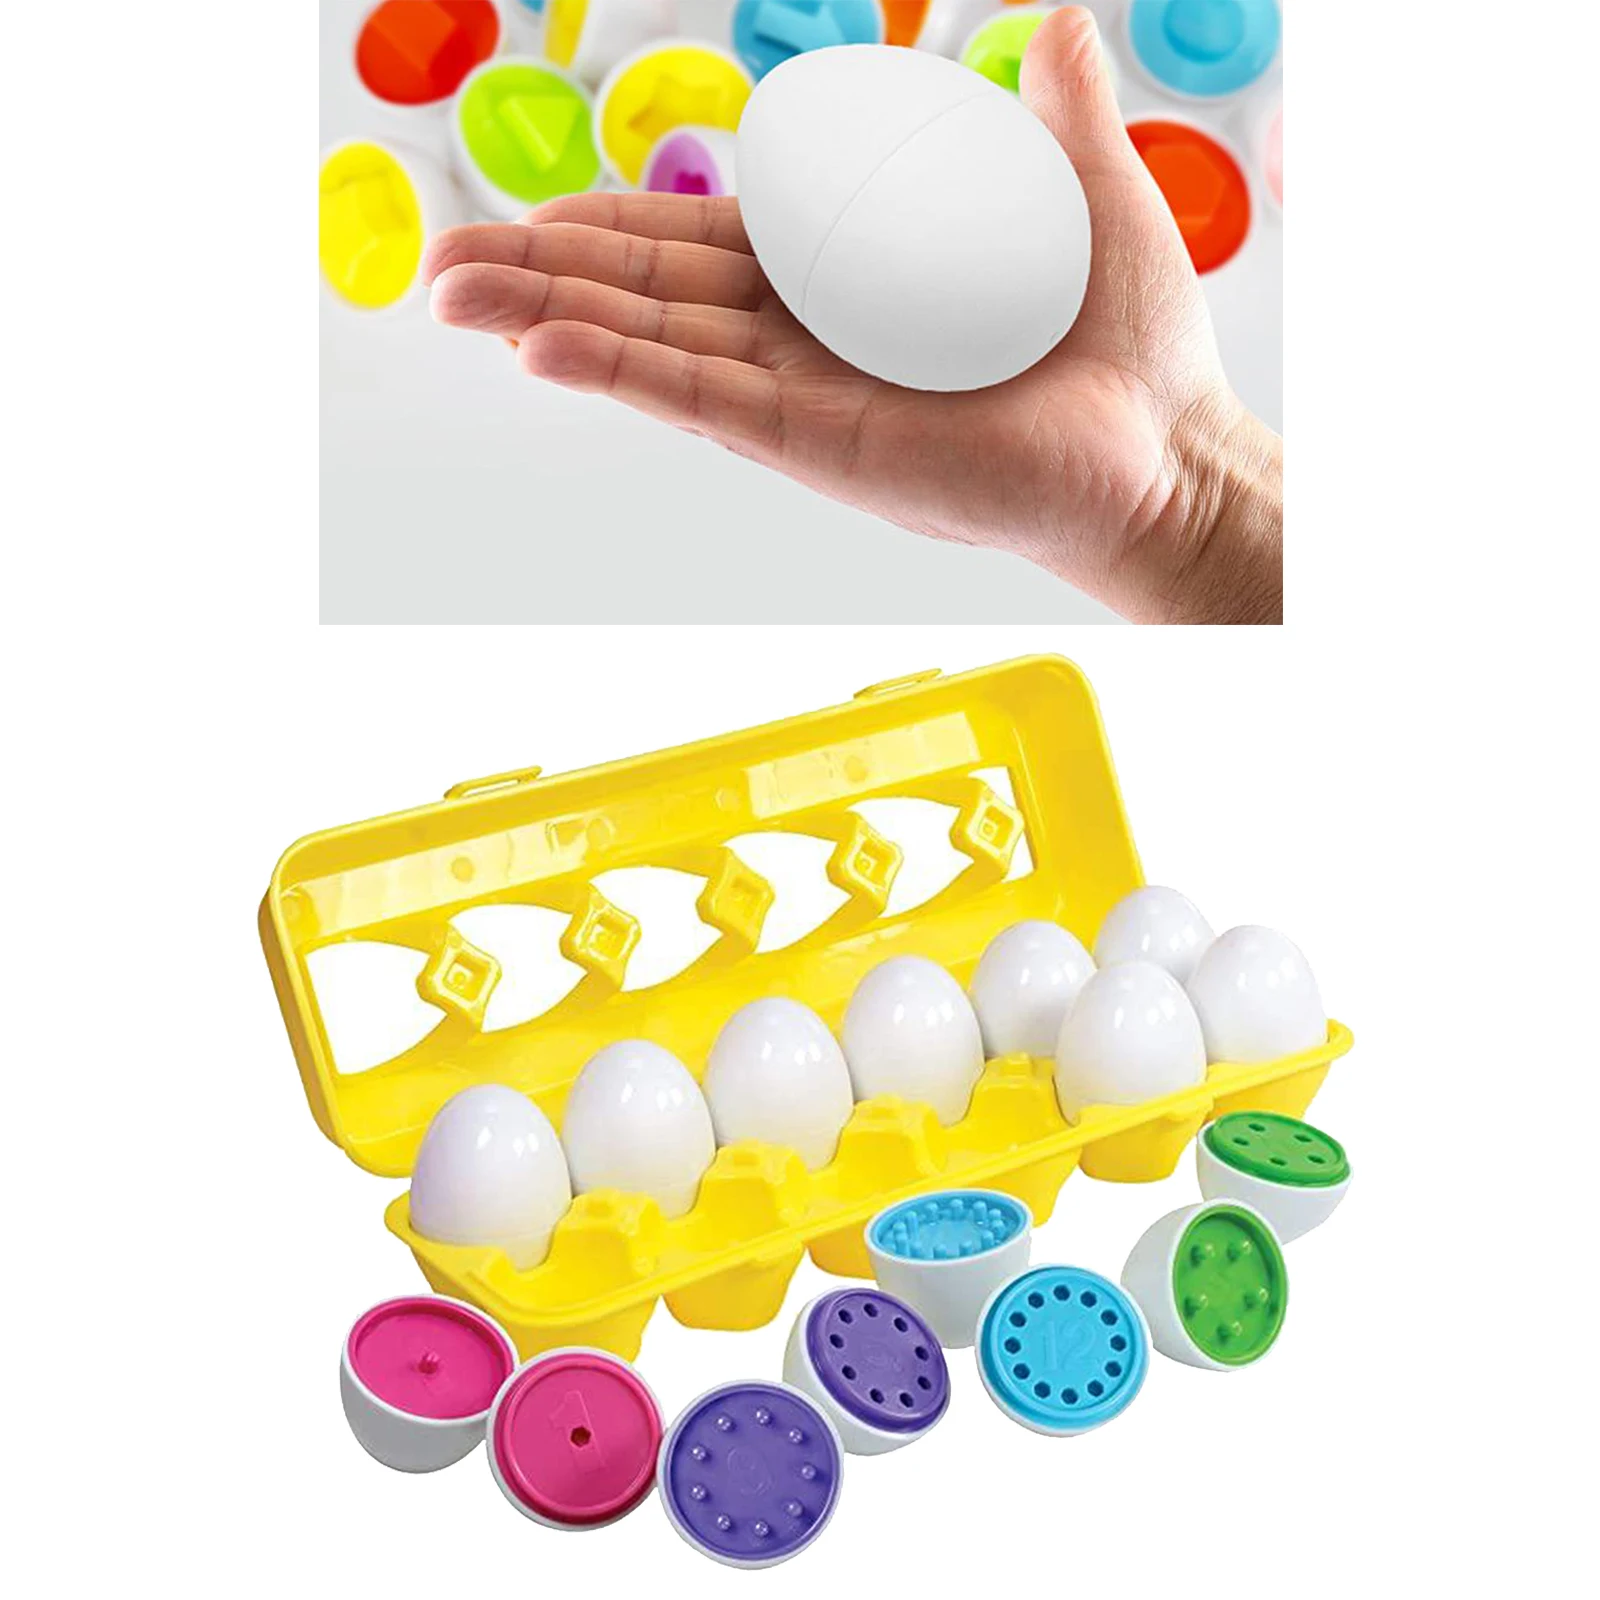 Matching Eggs 12 pcs Color & Shape Recoginition Sorter Puzzle for Easter Travel